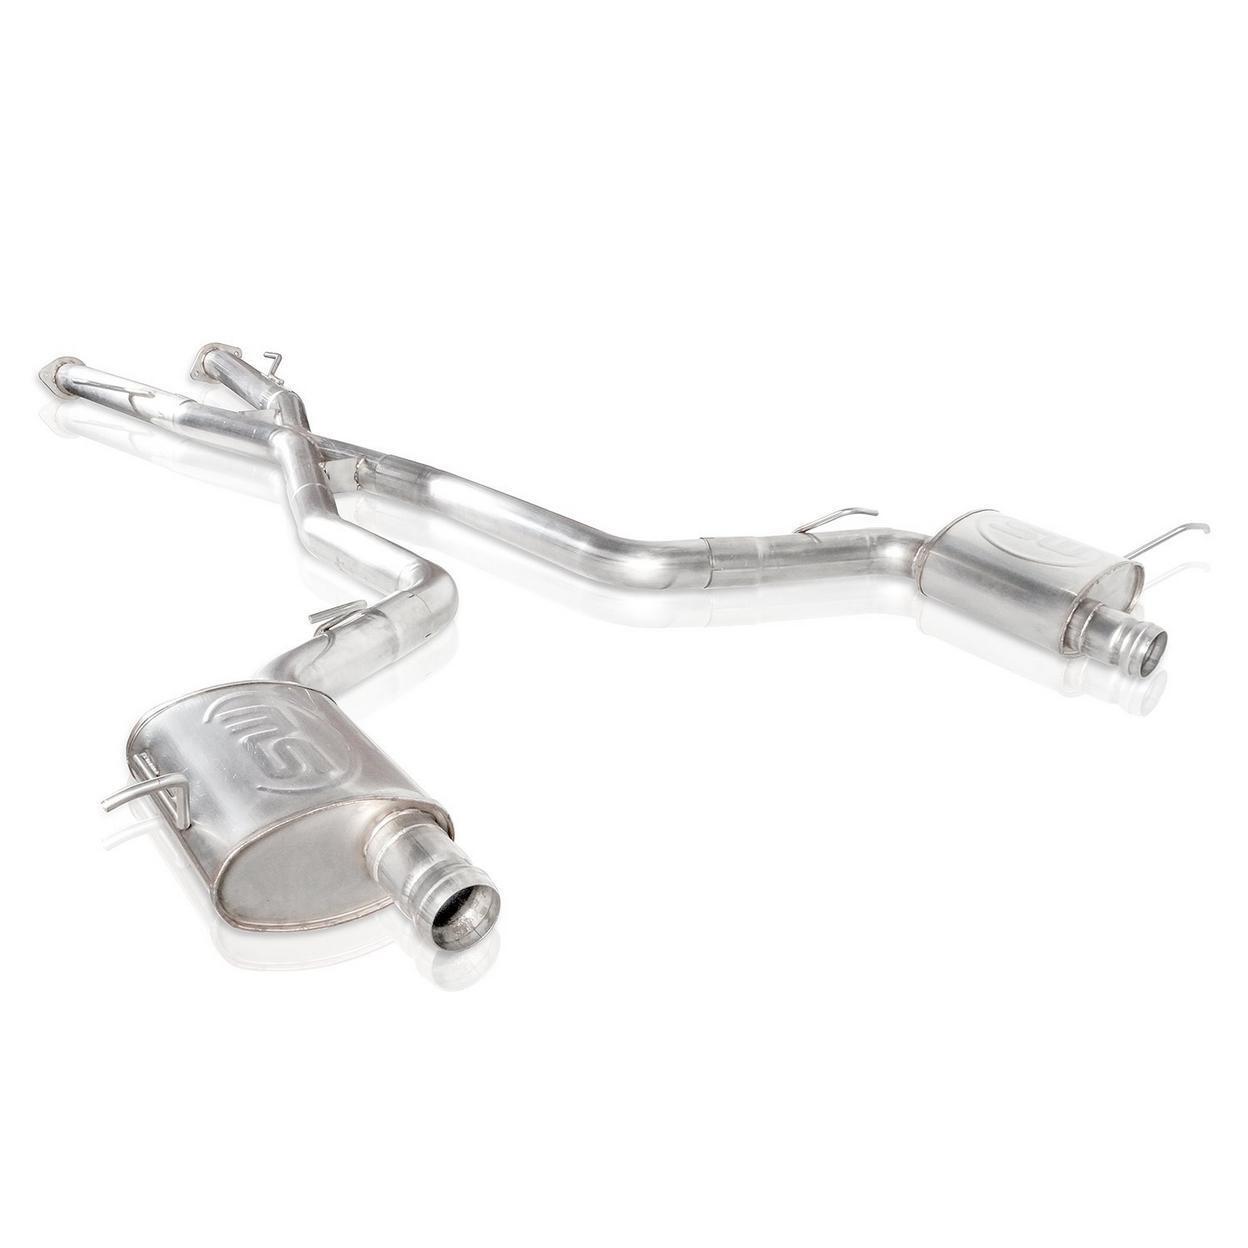 Exhaust System Kit for 2019 Jeep Jeep Trackhawk Supercharged 6.2L V8 GAS OHV